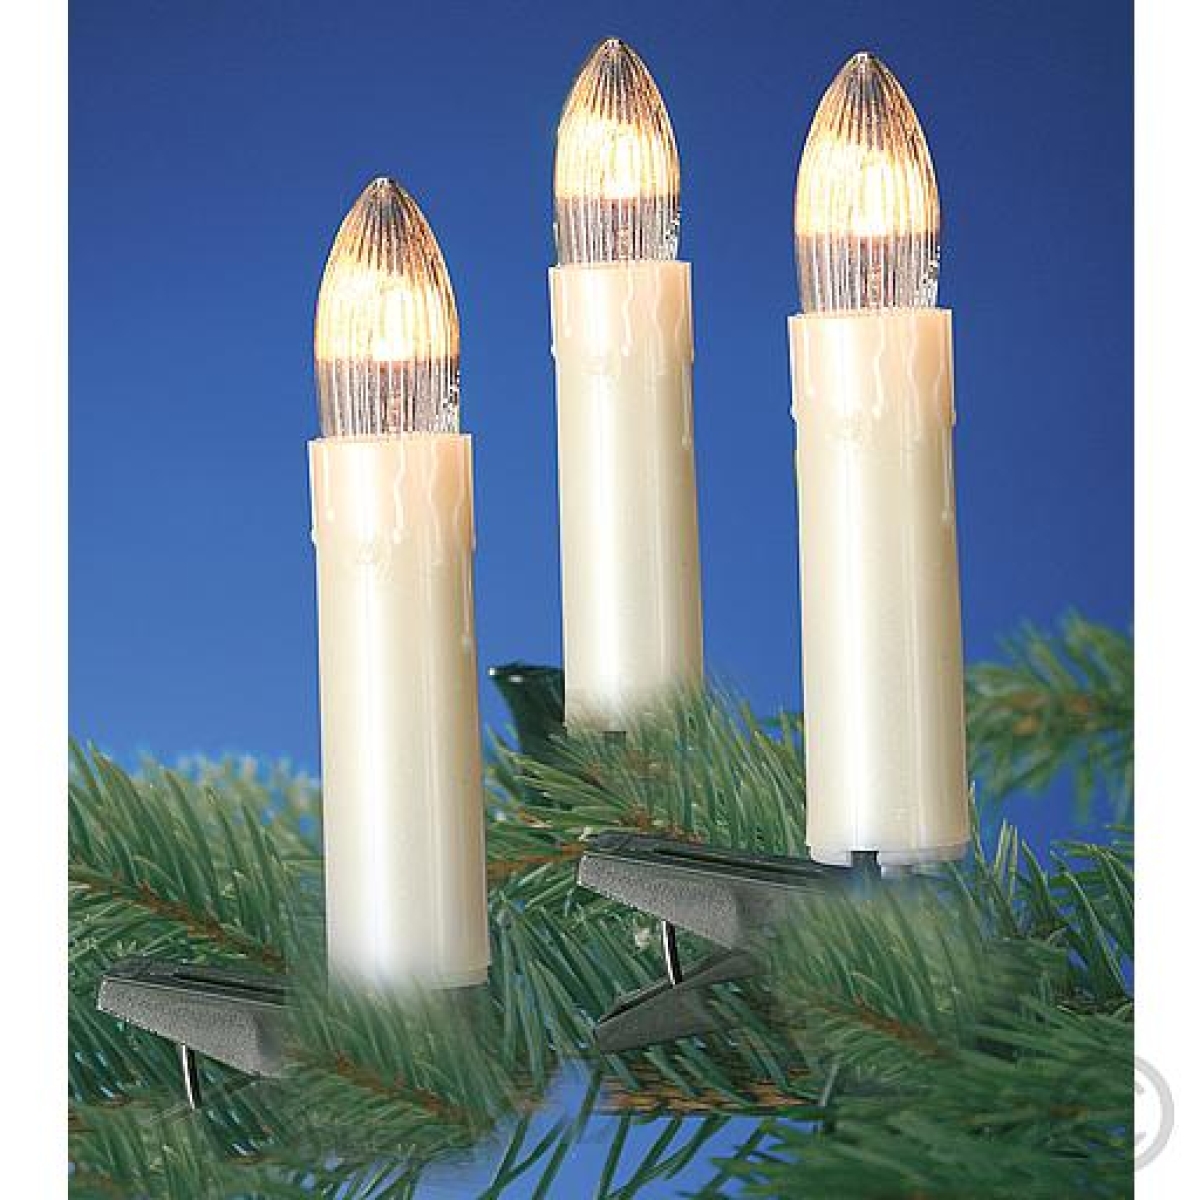 EGBInner chain with top candles, illuminated length 4.5m total length 6m 24V/3W 10 flamesArticle-No: 849020